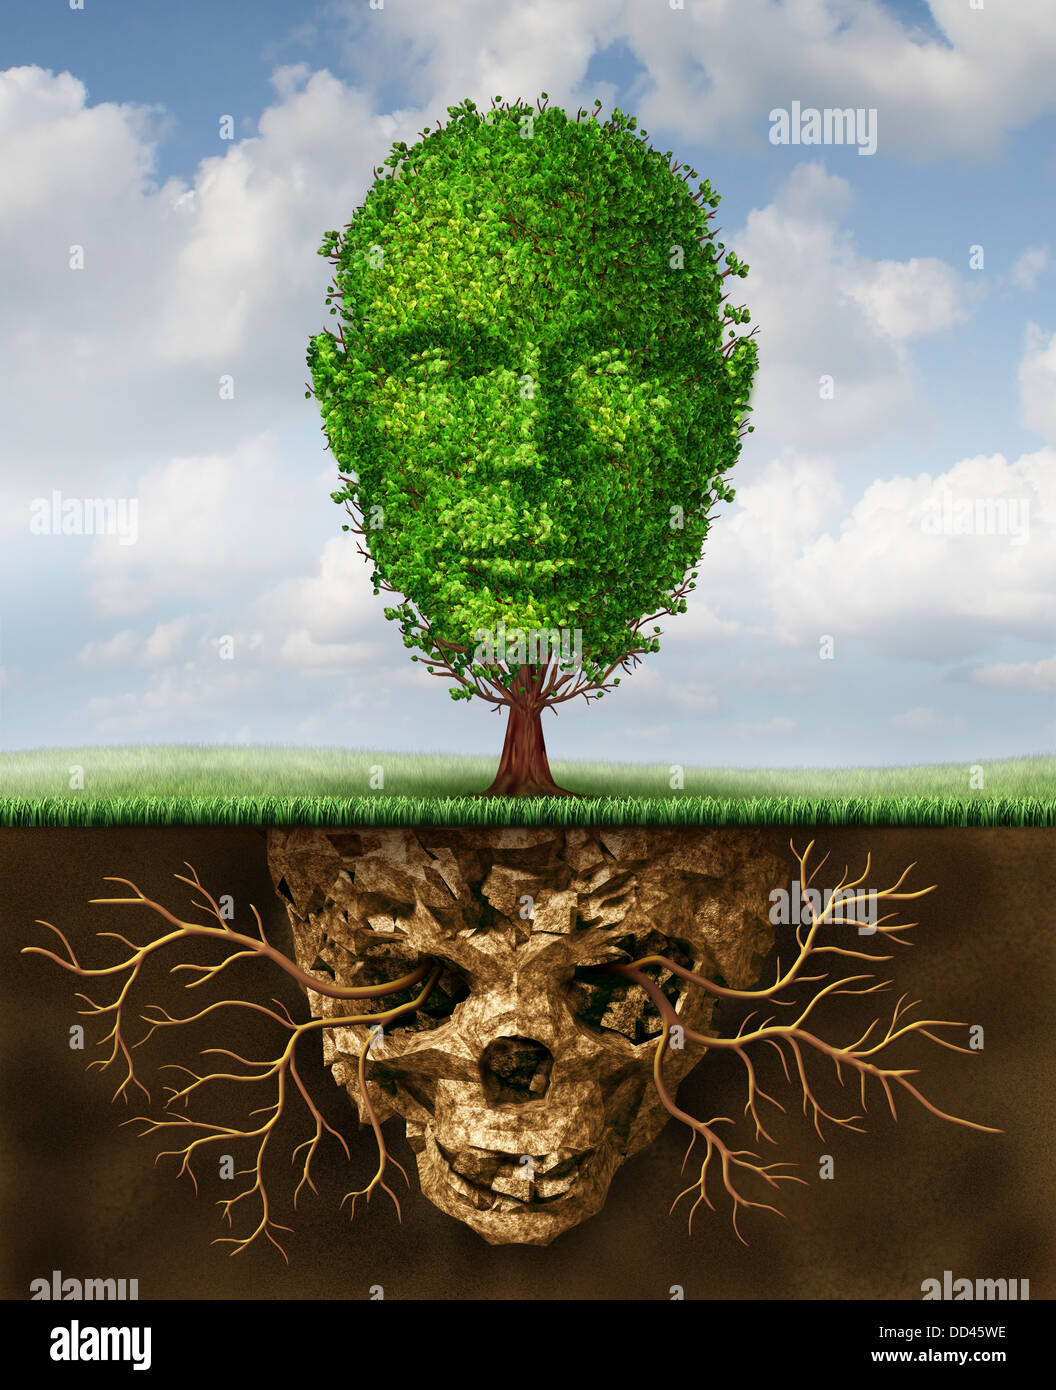 Rebirth and renewal lifestyle concept as a symbol of second chances and personal growth and revival from a crisis as a tree shaped as a human head growing out of toxic soil shaped as a death skull. Stock Photo